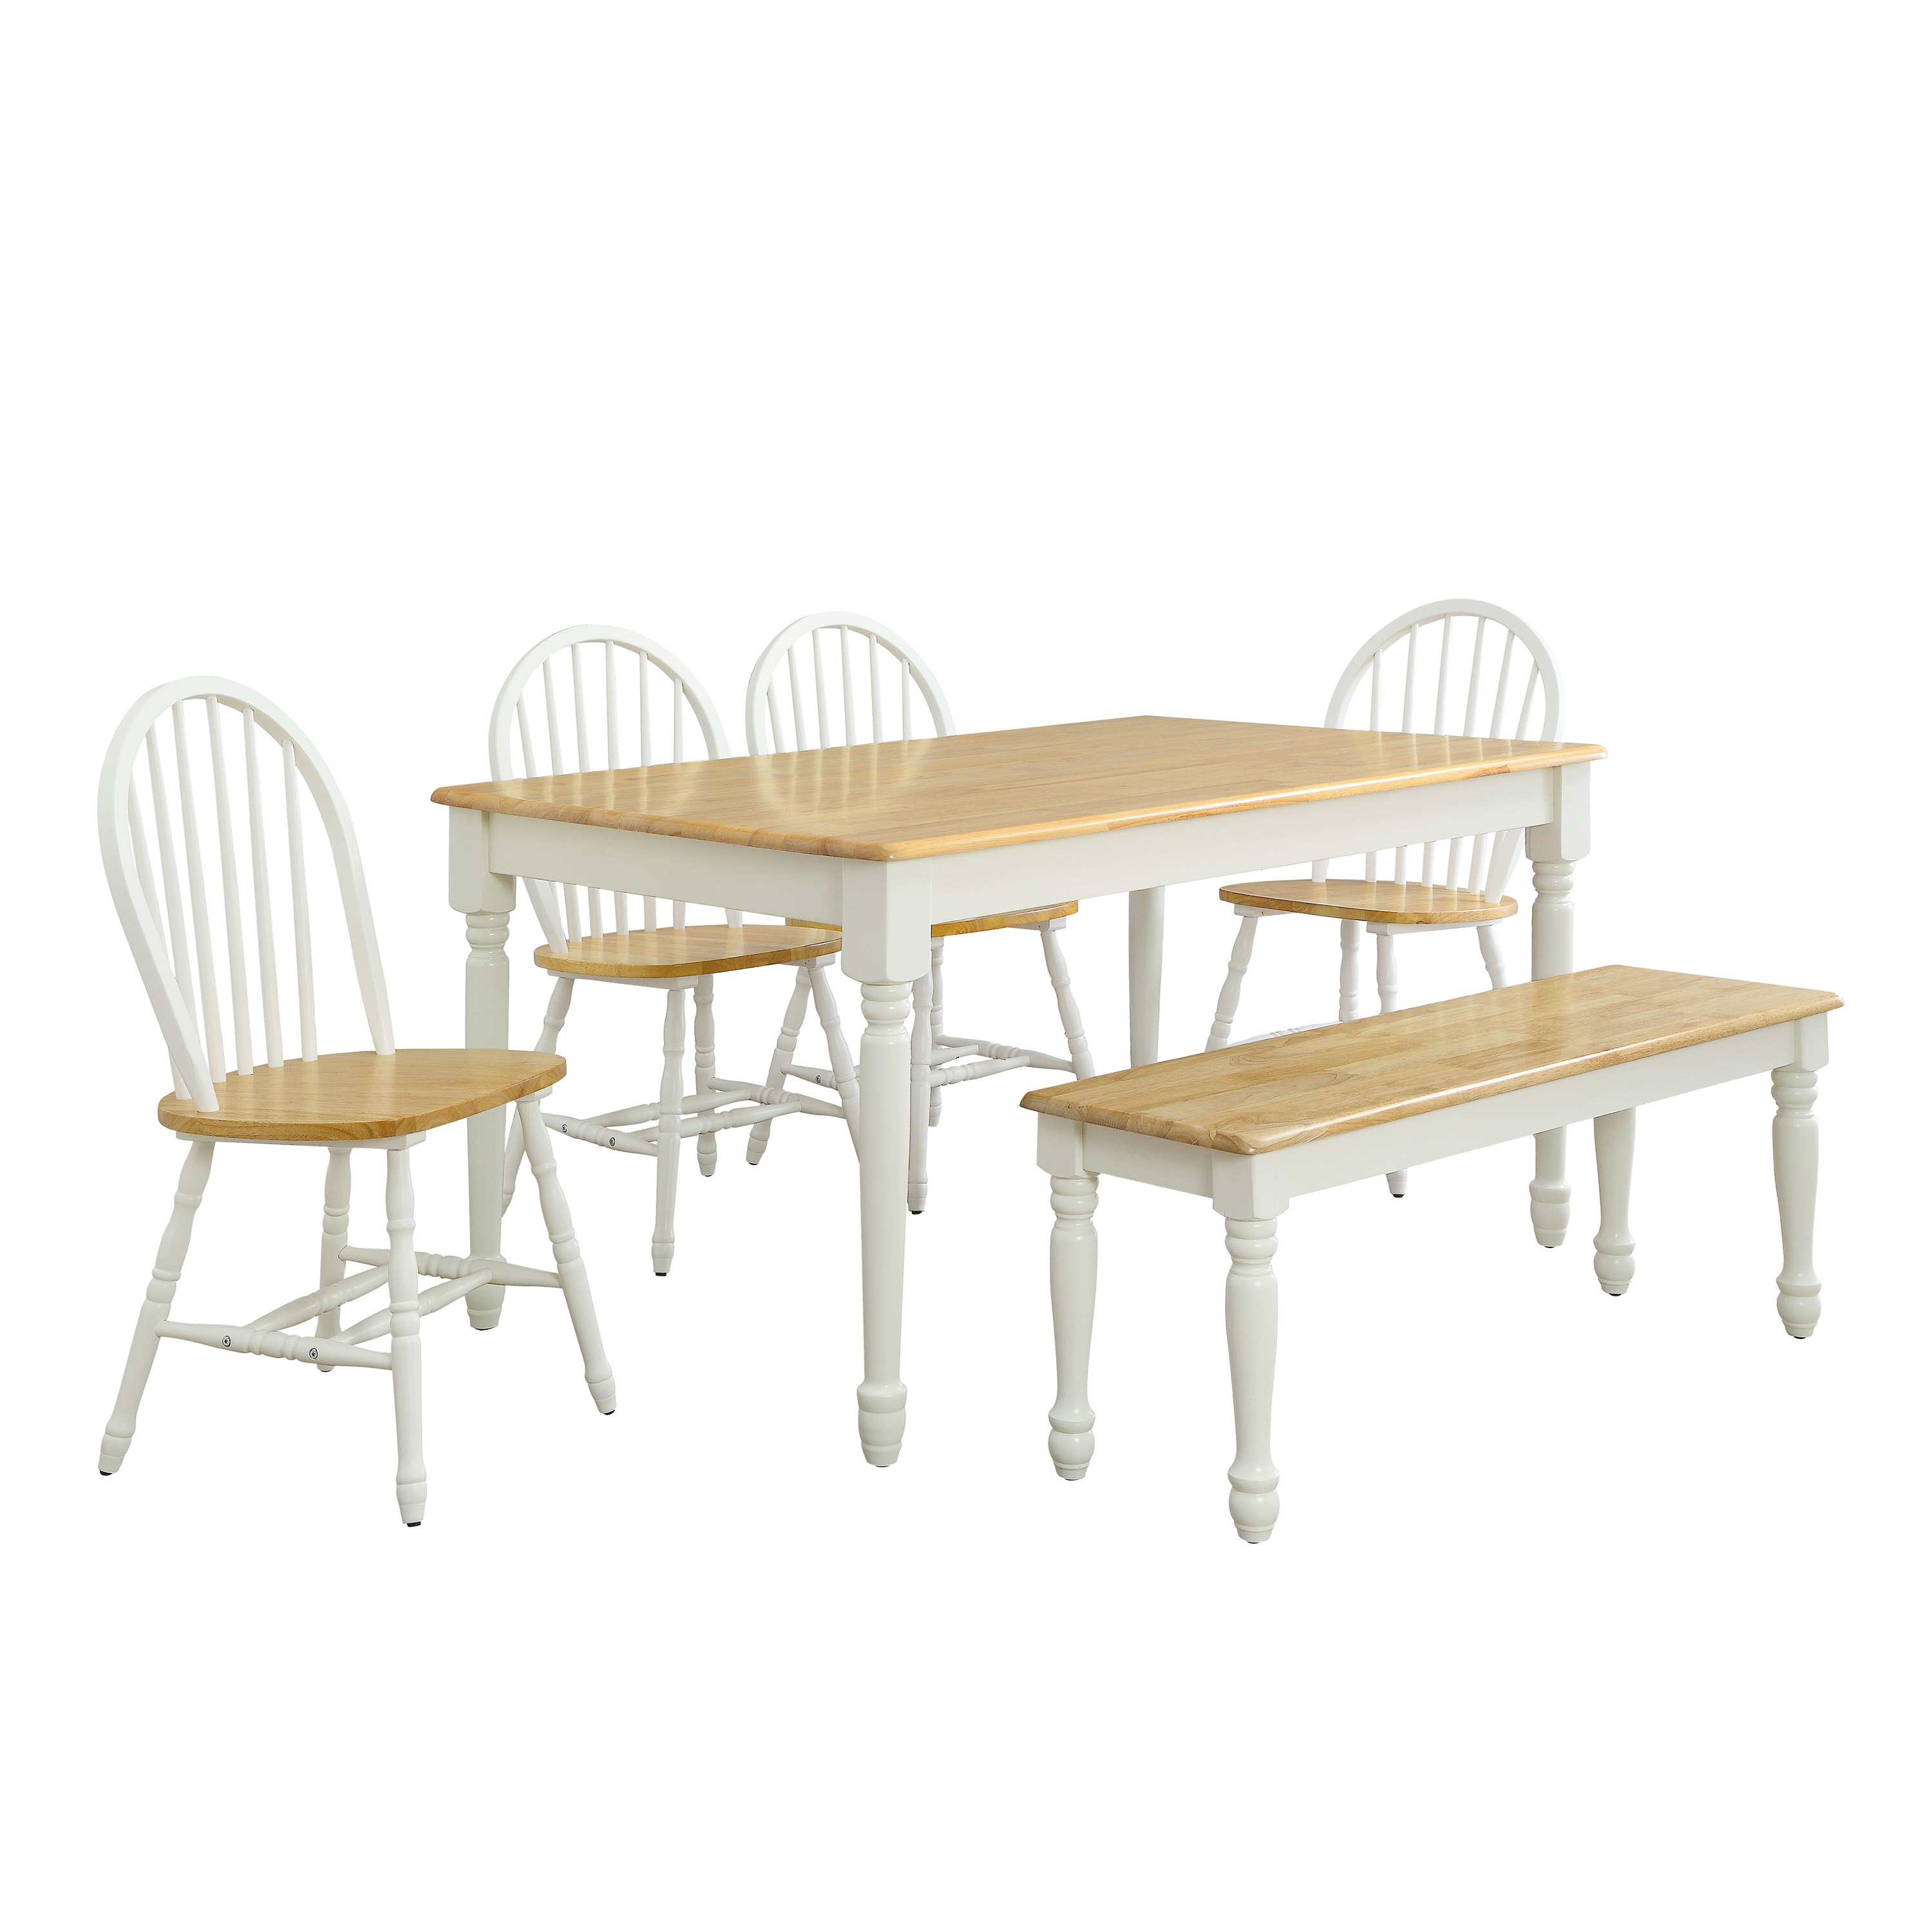 Better Homes and Gardens Autumn Lane Farmhouse Dining Table, White and Natural (Table only) - image 4 of 9